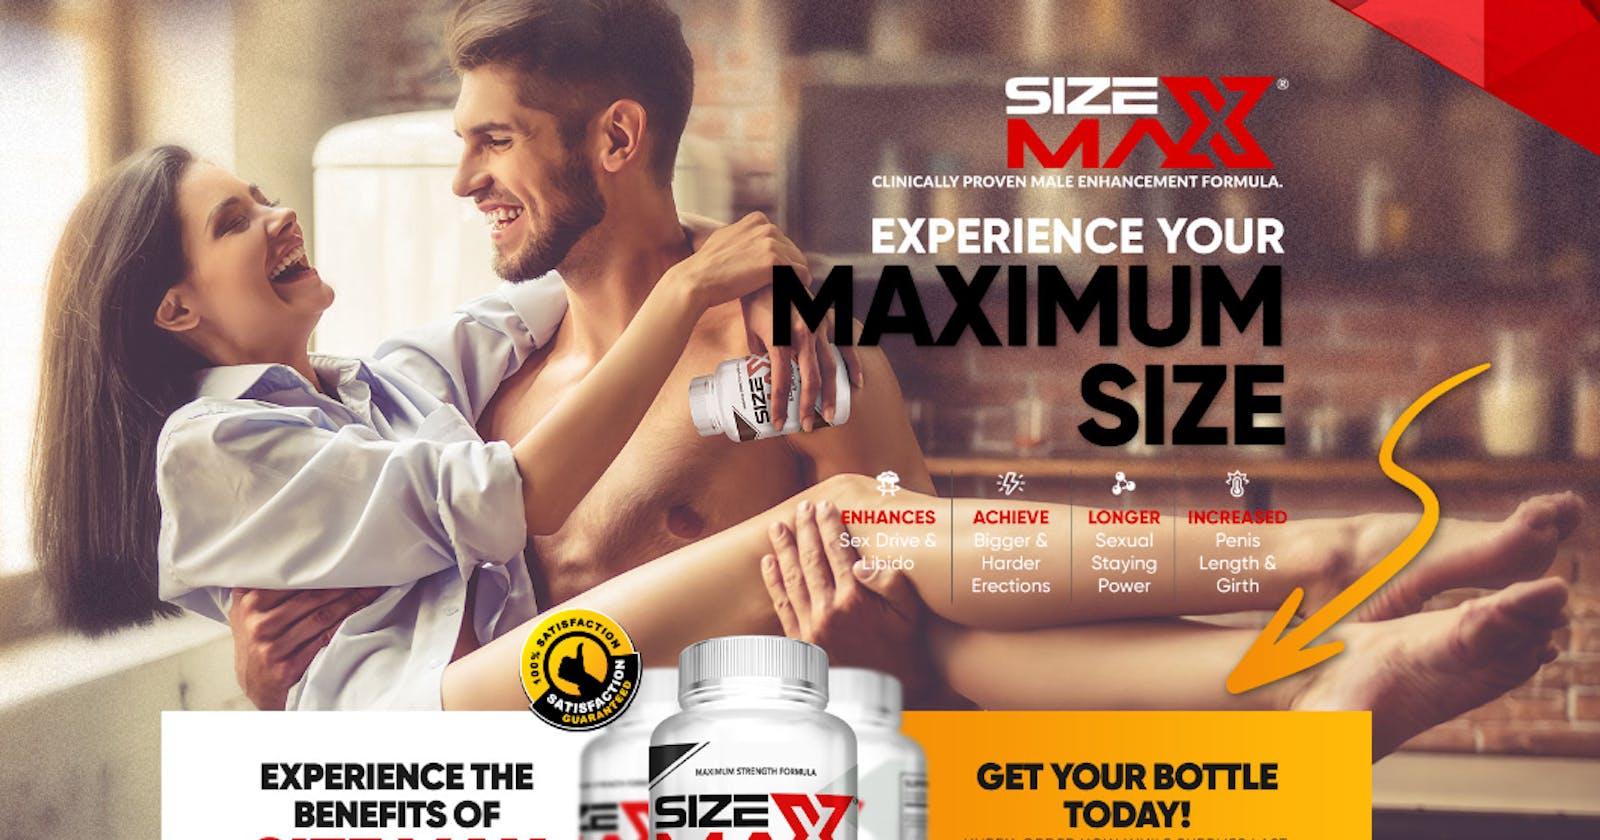 Size Max Male Enhancement - Obvious Ripoff or Pills That Work?